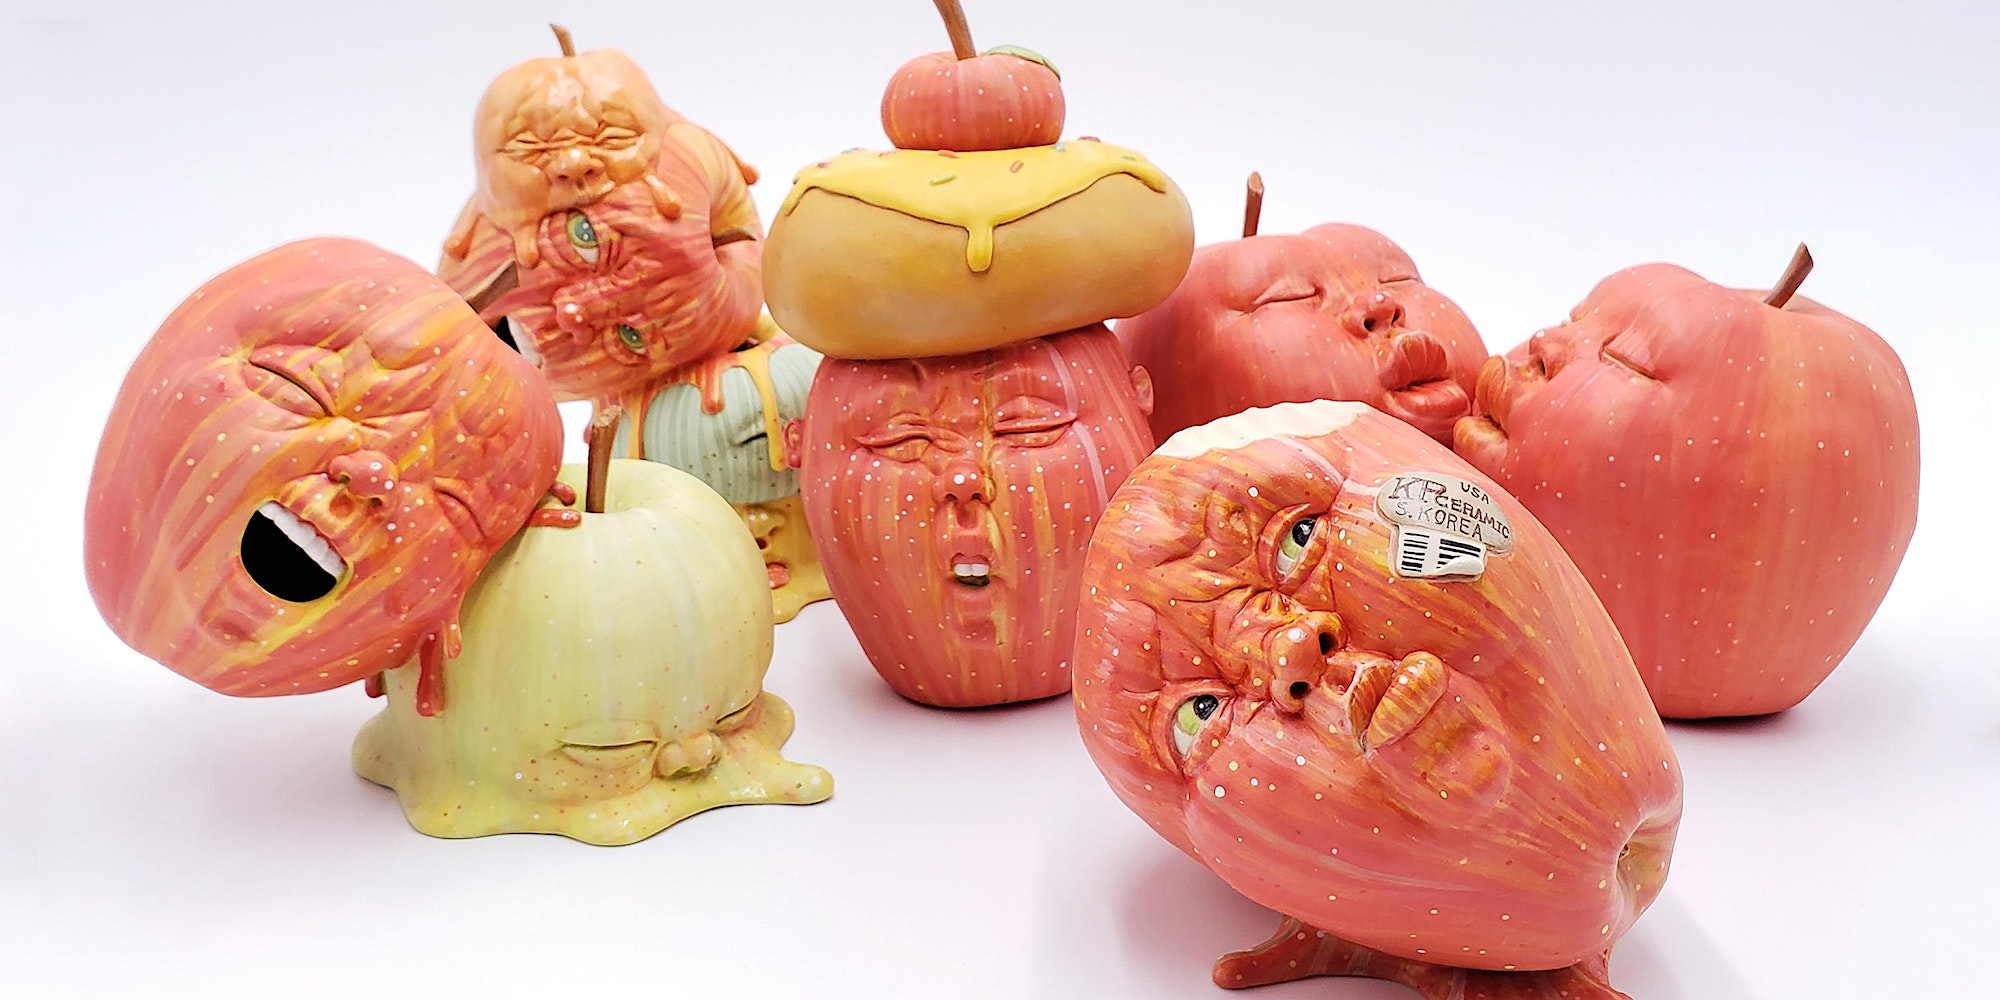 An ensemble of intricately carved pumpkins, each boasting a distinctive face.